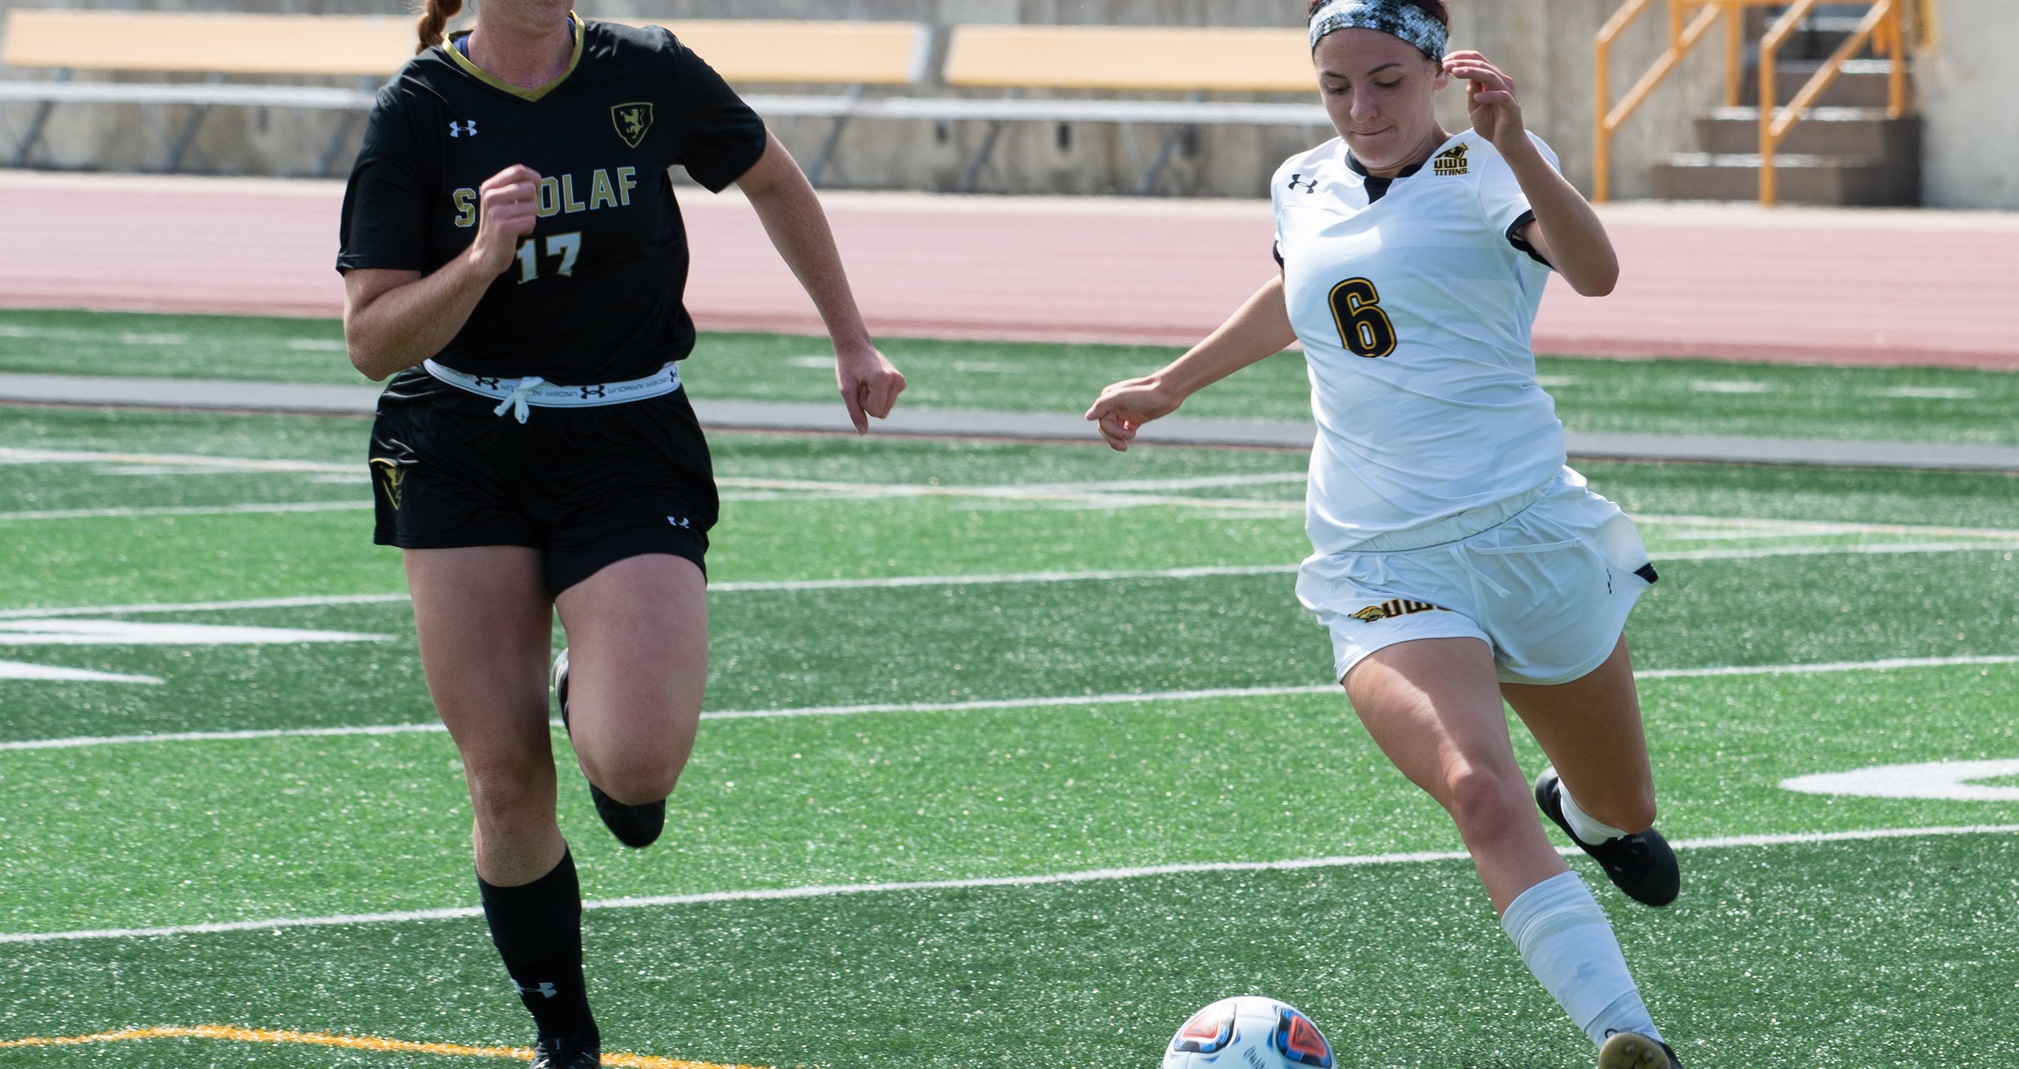 Mallory Knight's game-winning goal against Milwaukee School of Engineering was the second of her career.